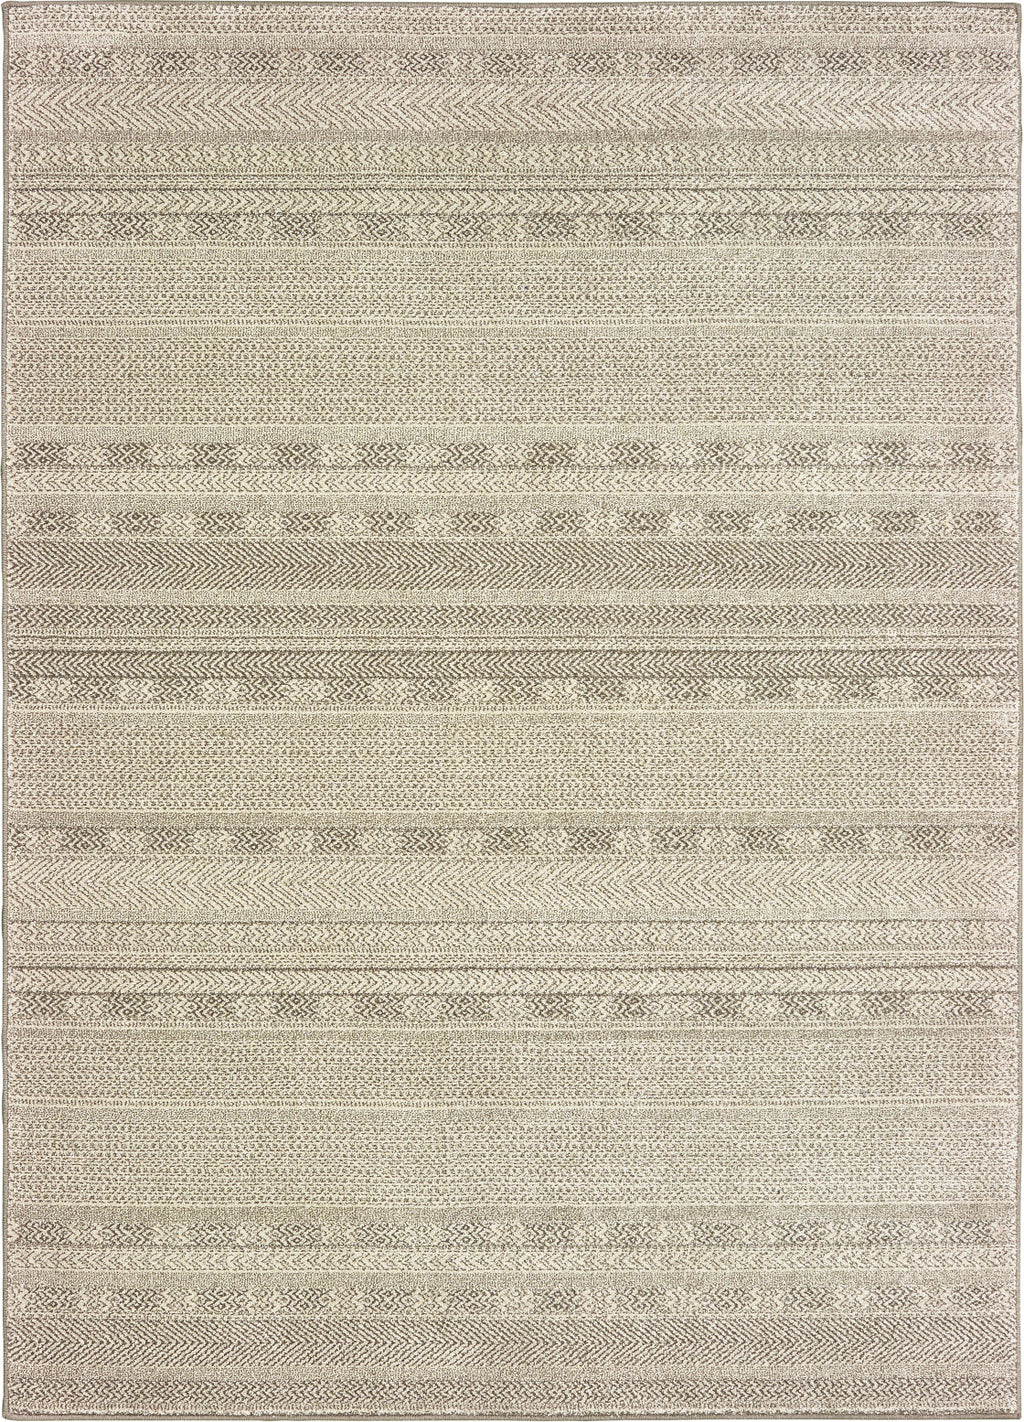 Oriental Weavers Richmond 801H3 Ivory/Brown Area Rug main image featured